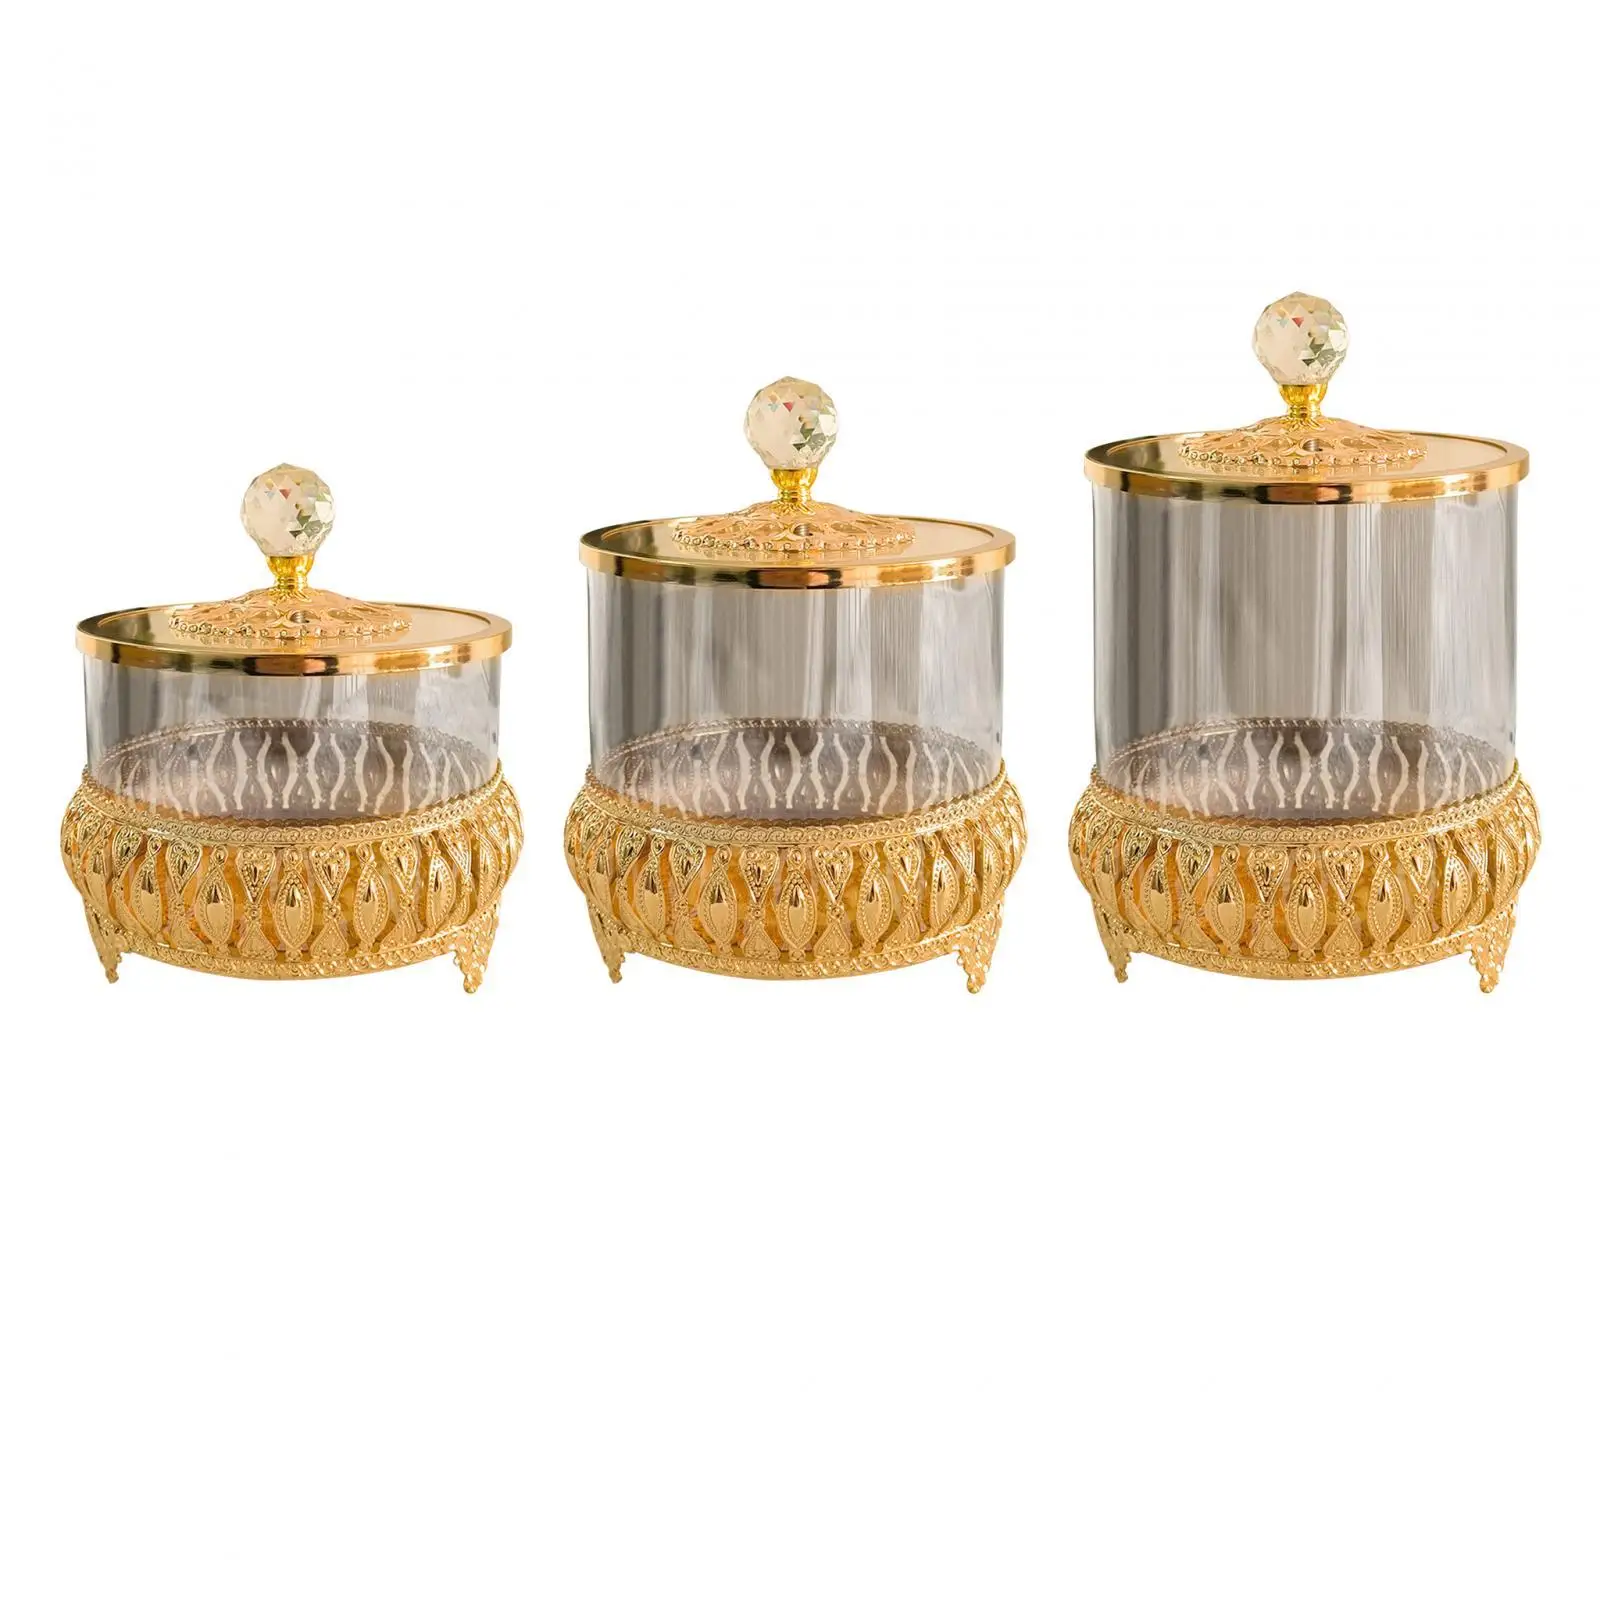 Candy Jar European Style Clear Biscuit Containers for Centerpieces Wedding